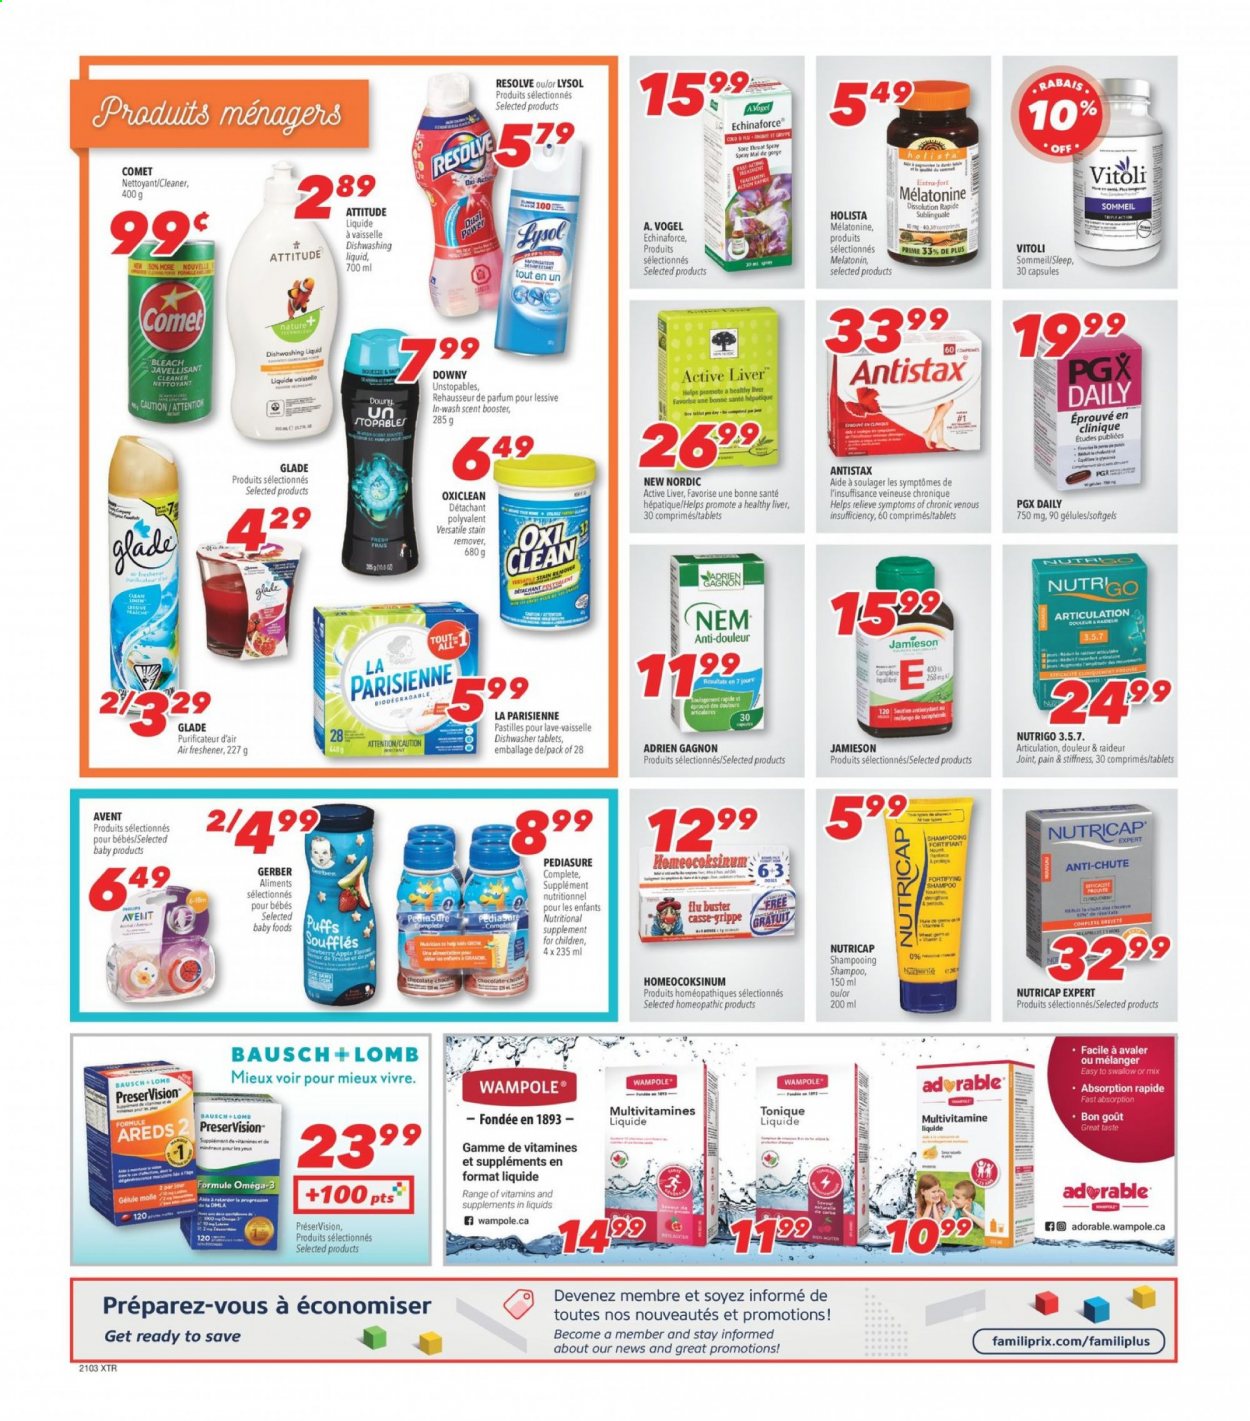 thumbnail - Familiprix Extra Flyer - January 14, 2021 - January 20, 2021 - Sales products - chocolate, pastilles, Gerber, puffs, cleaner, bleach, Lysol, OxiClean, Unstopables, dishwashing liquid, Clinique, Omega-3, nutritional supplement, Echinaforce, shampoo. Page 6.